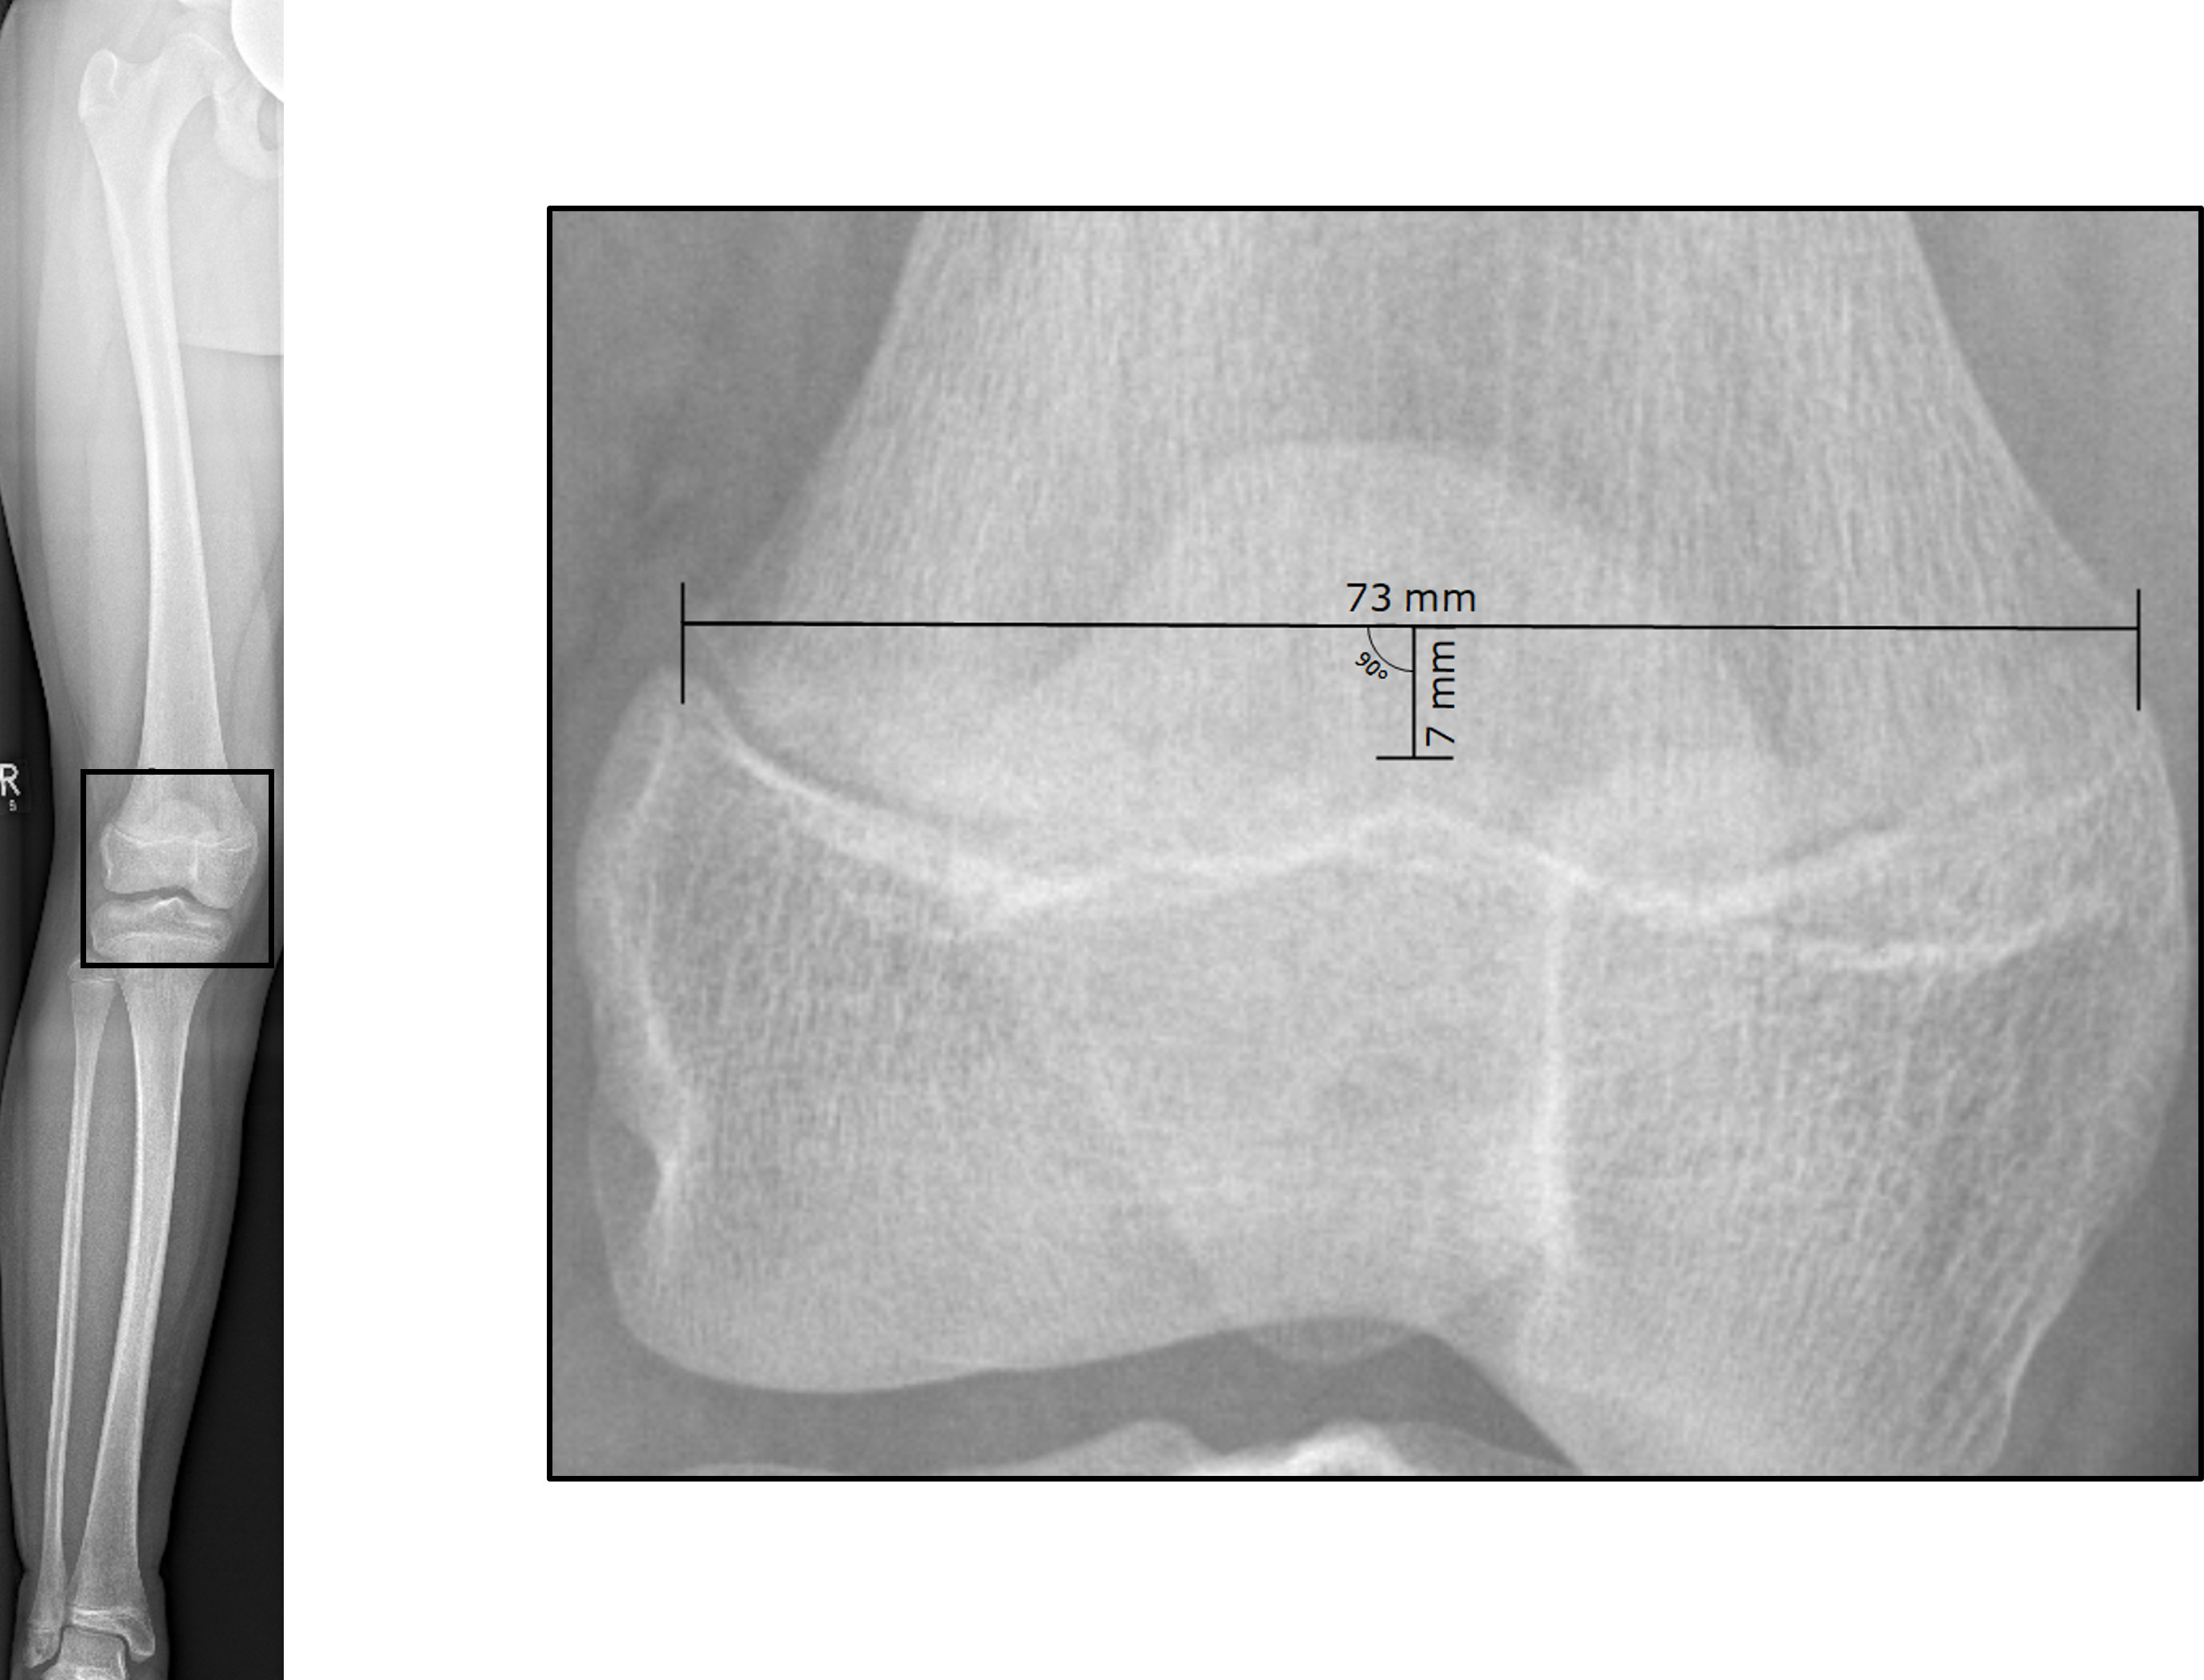 Fig. 1 
            Determination of skeletal age using the central peak height method on a long leg radiograph (age 11 years 9 months, female). First, a scalable, standardized, digital long leg radiograph was taken in an anteroposterior orientation no more than one month before surgery and used to evaluate the central peak value (CPV). The CPV was calculated by dividing the distance between the central peak of the distal femoral physis and a line between the medial and lateral ends of the distal femoral physis (7 mm) by the width of the distal femoral physis (73 mm). The CPV value was then used to determine skeletal age.
          